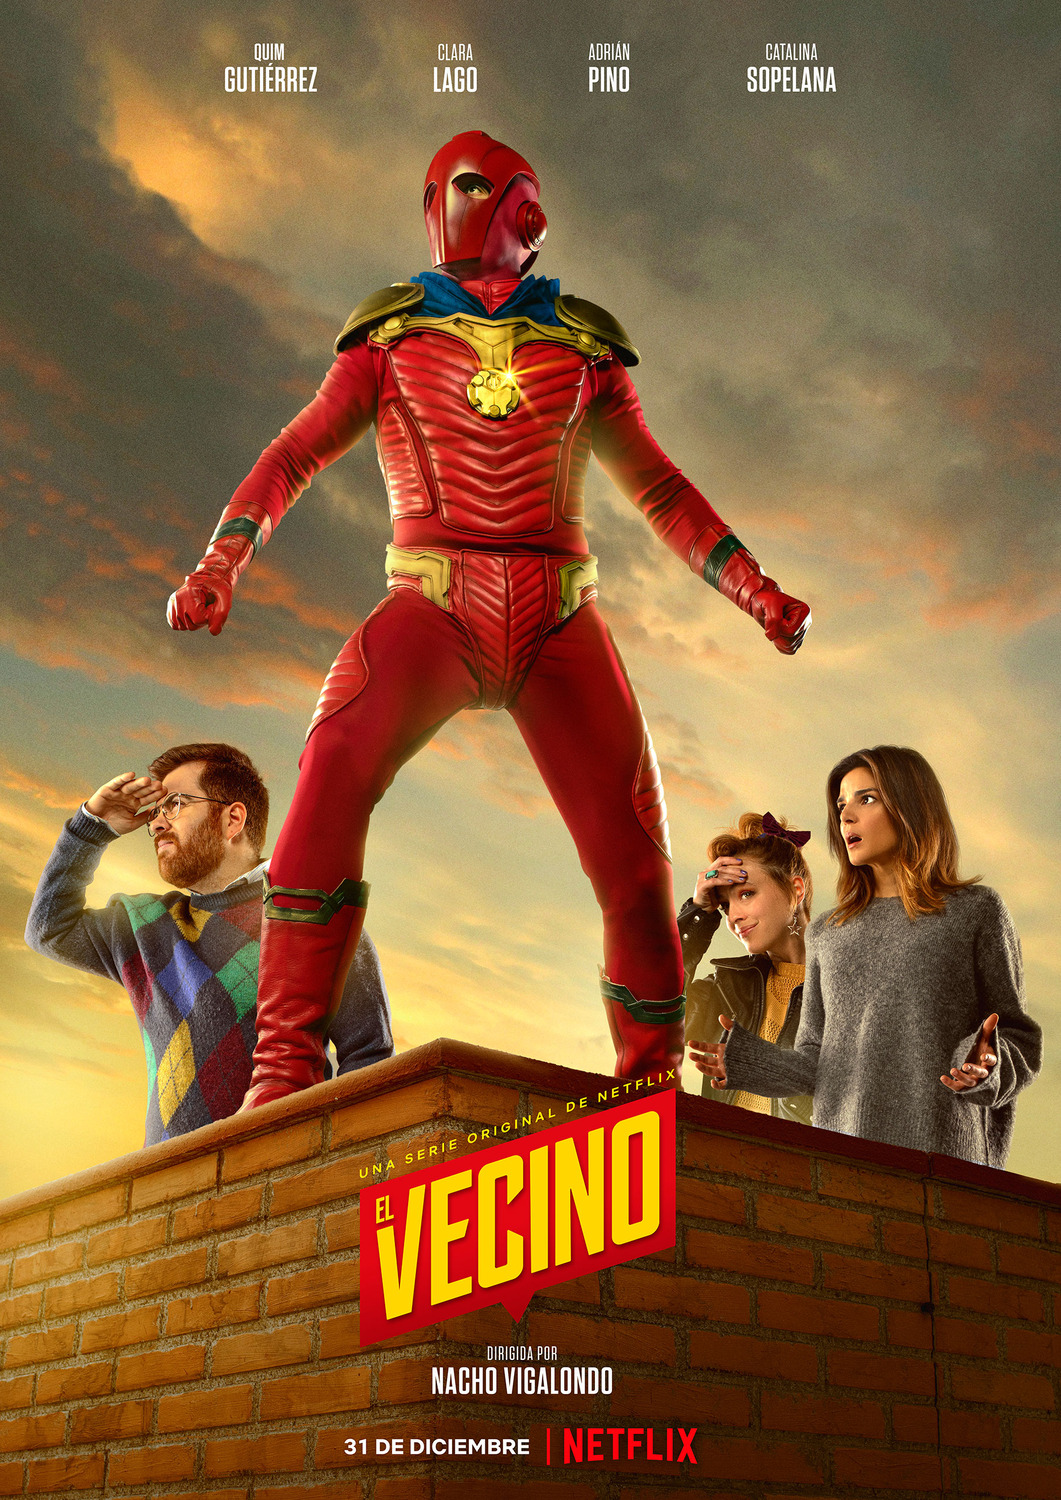 Extra Large TV Poster Image for El vecino (#6 of 9)